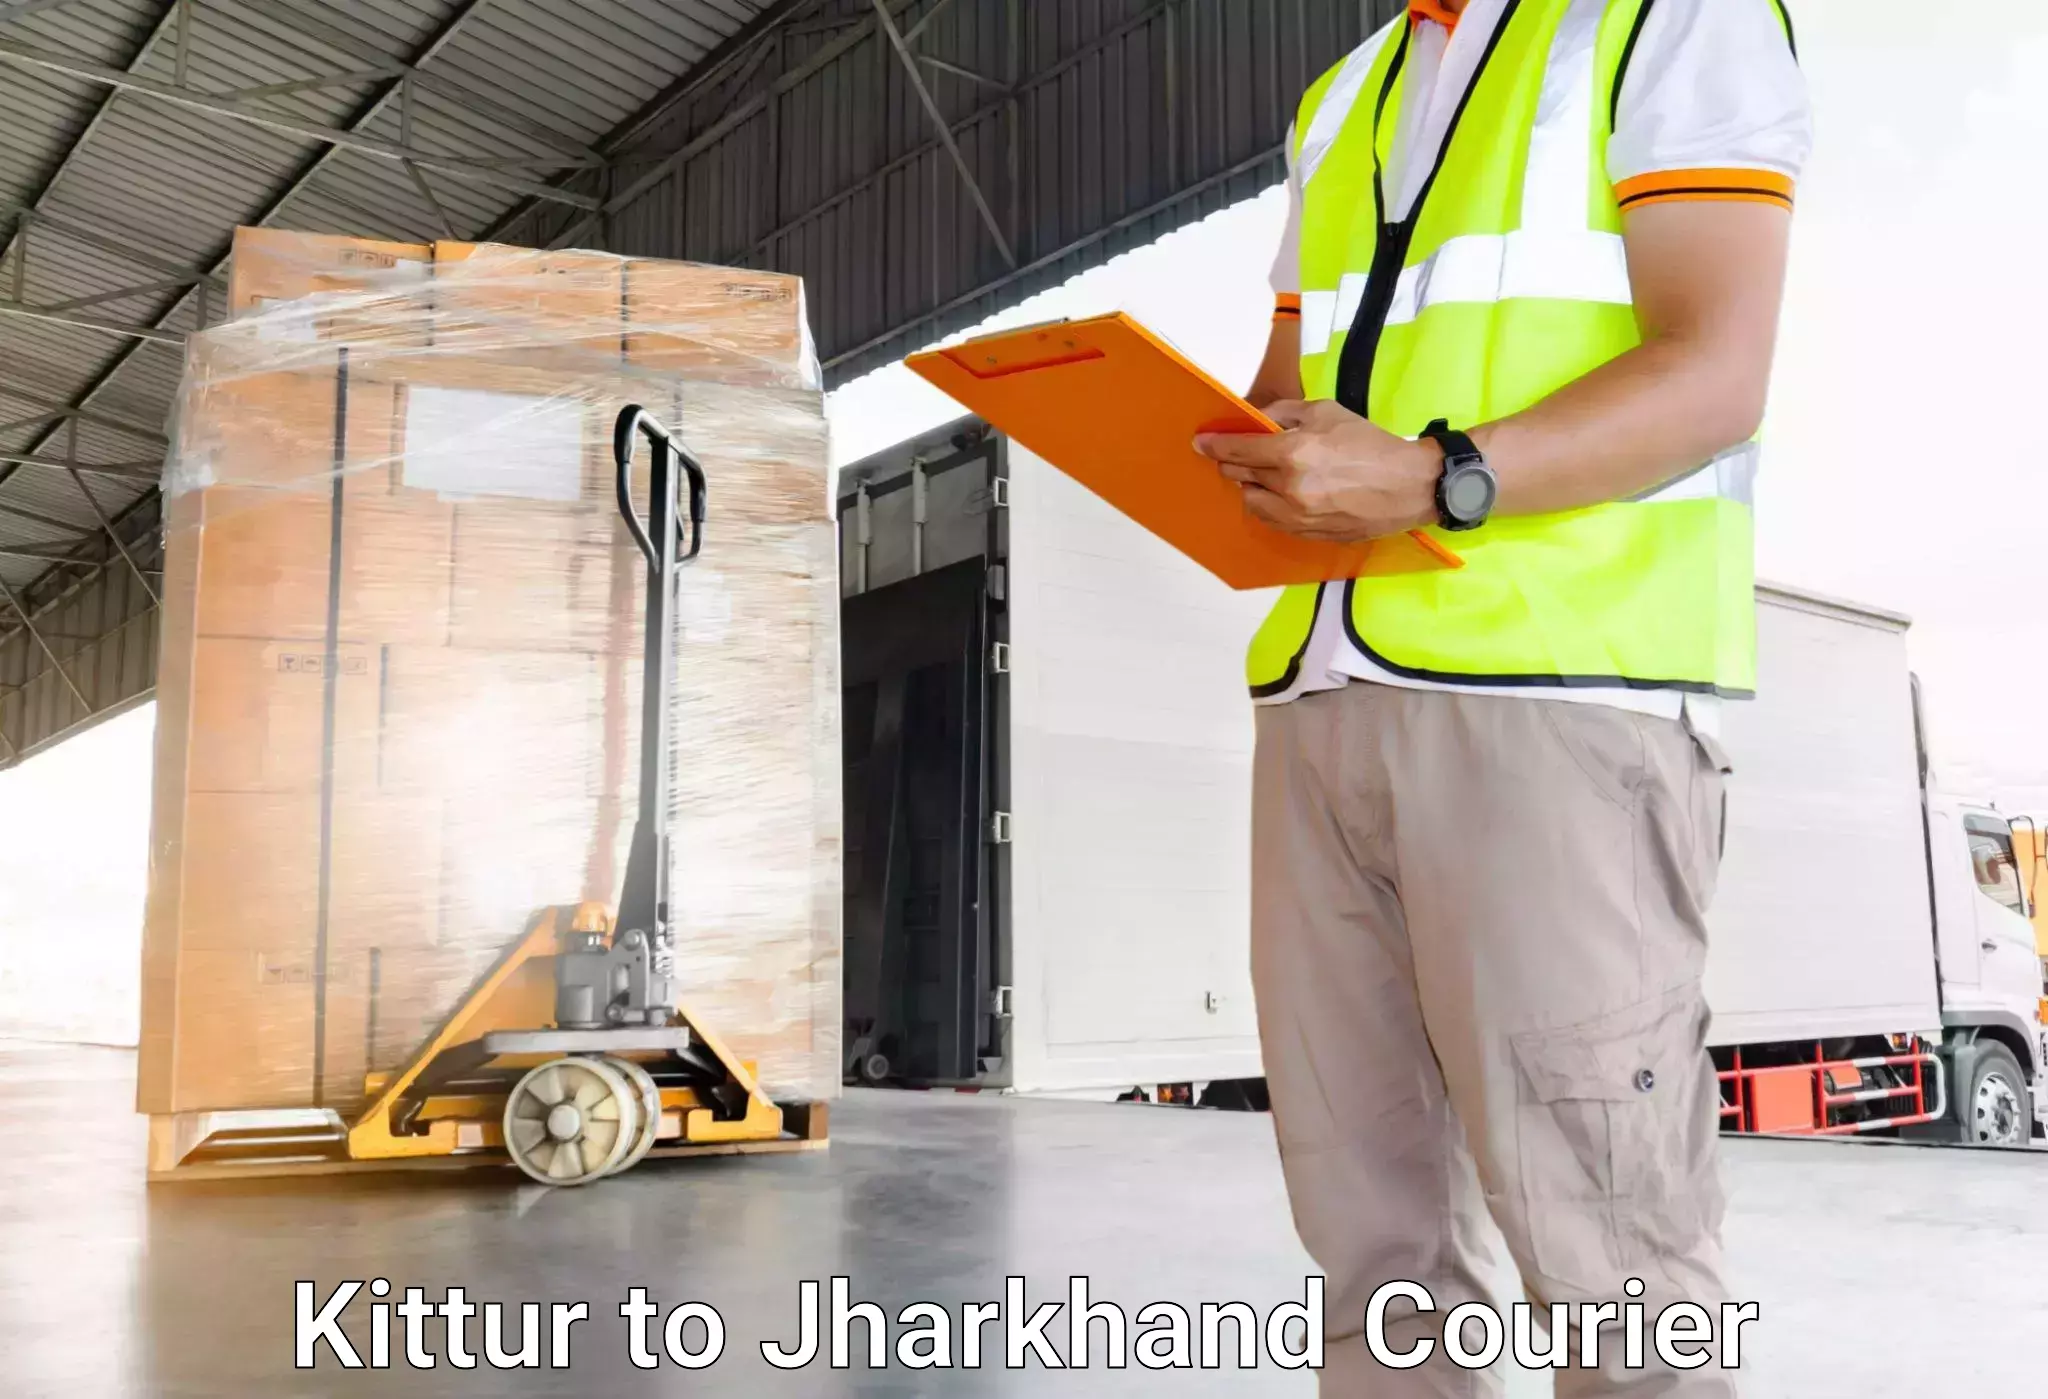 Online luggage shipping booking Kittur to Bara Boarijor